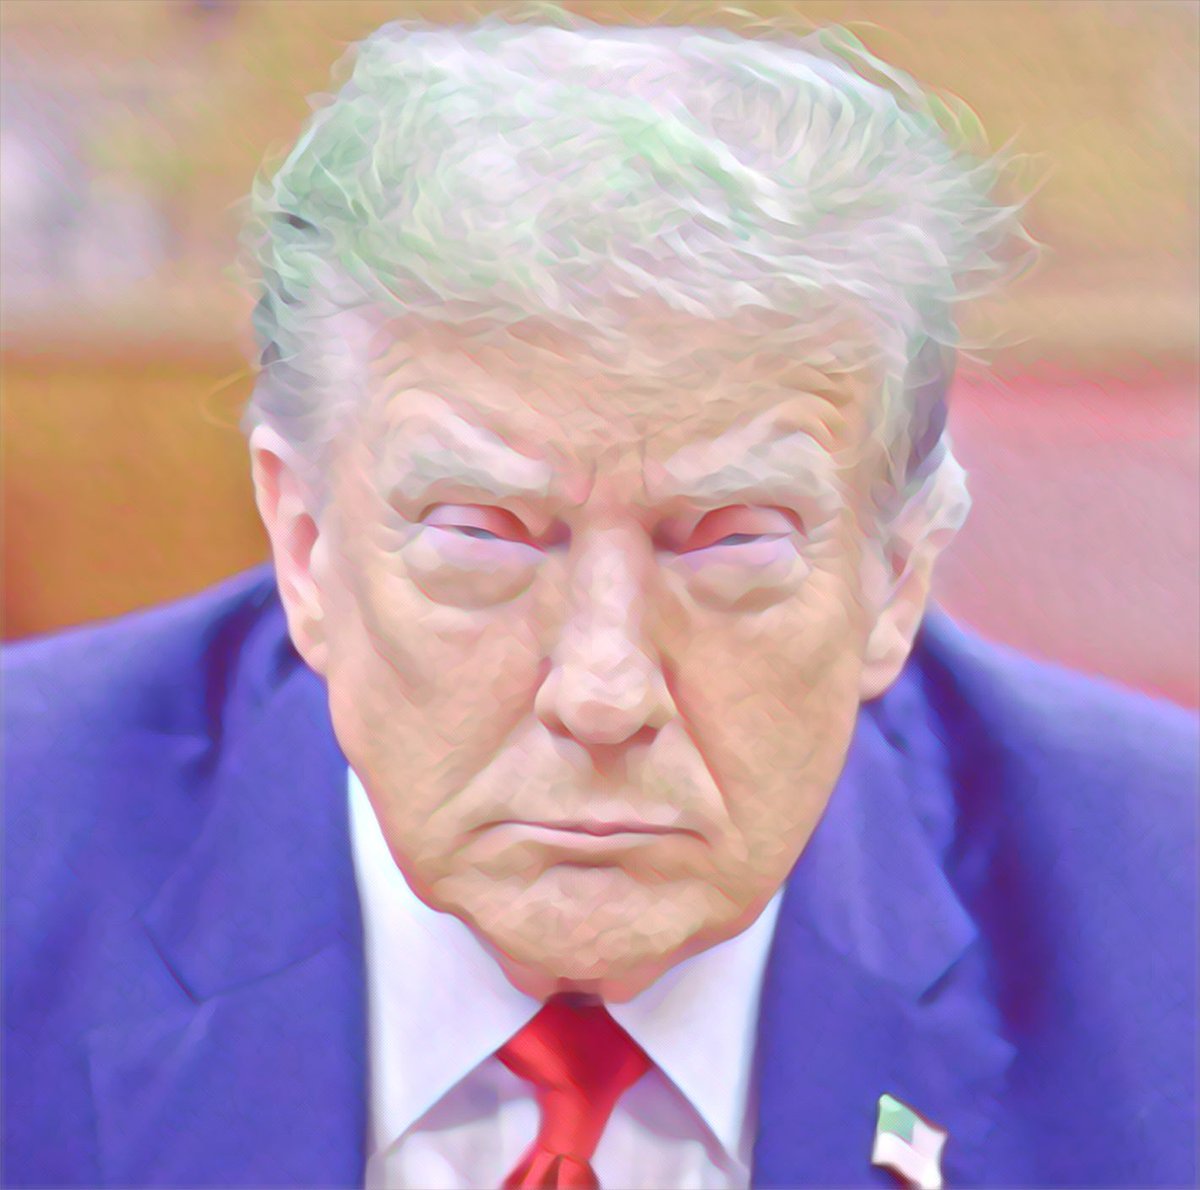 Here is a stylized photo from the first day of criminal trial of Donald Trump. Here you see a massively compromised individual. Here is an indicted felon who a significant percentage of Americans want as their leader. No way!
#SleepyDonald 
#LowEnergyTrump 
#TheNodFather